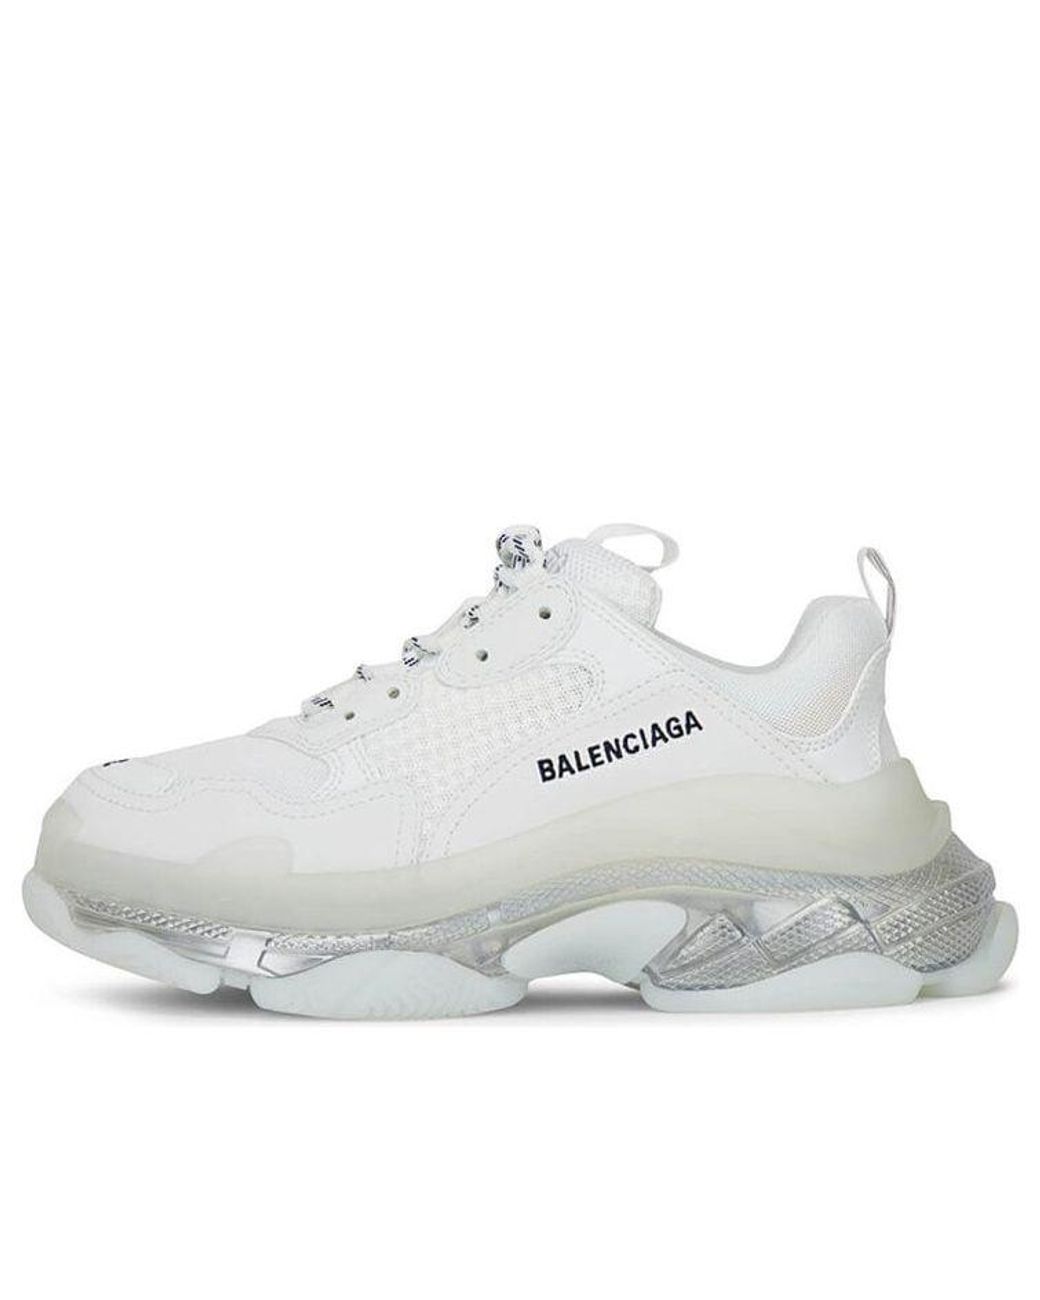 Balenciaga Triple S Clear Sole Clunky Shoes White | Lyst